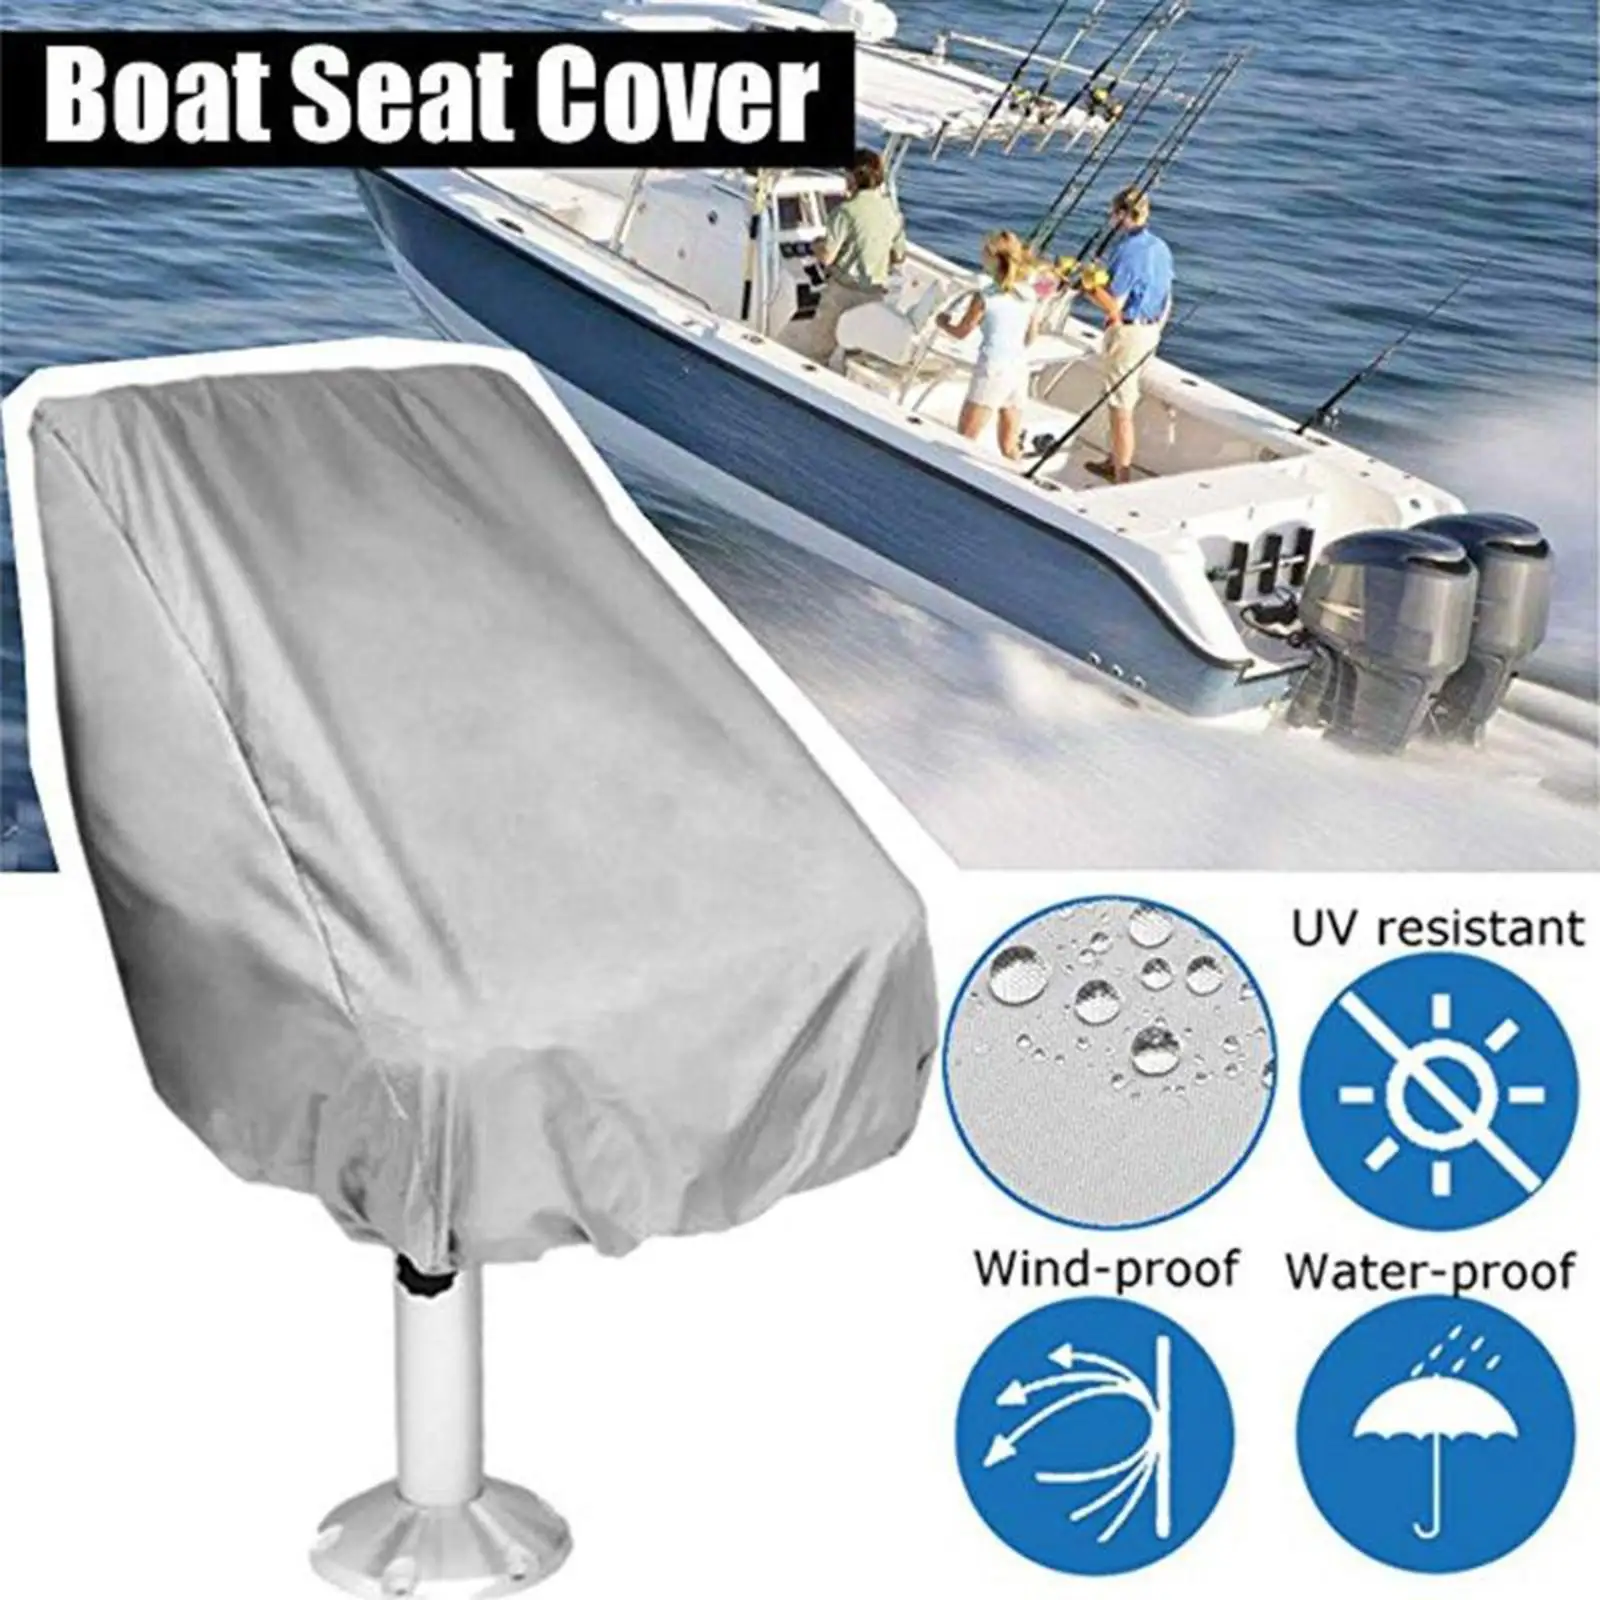 2X Boat Seat Cover Outdoor Yacht Waterproof Elastic Hem Protection Silver